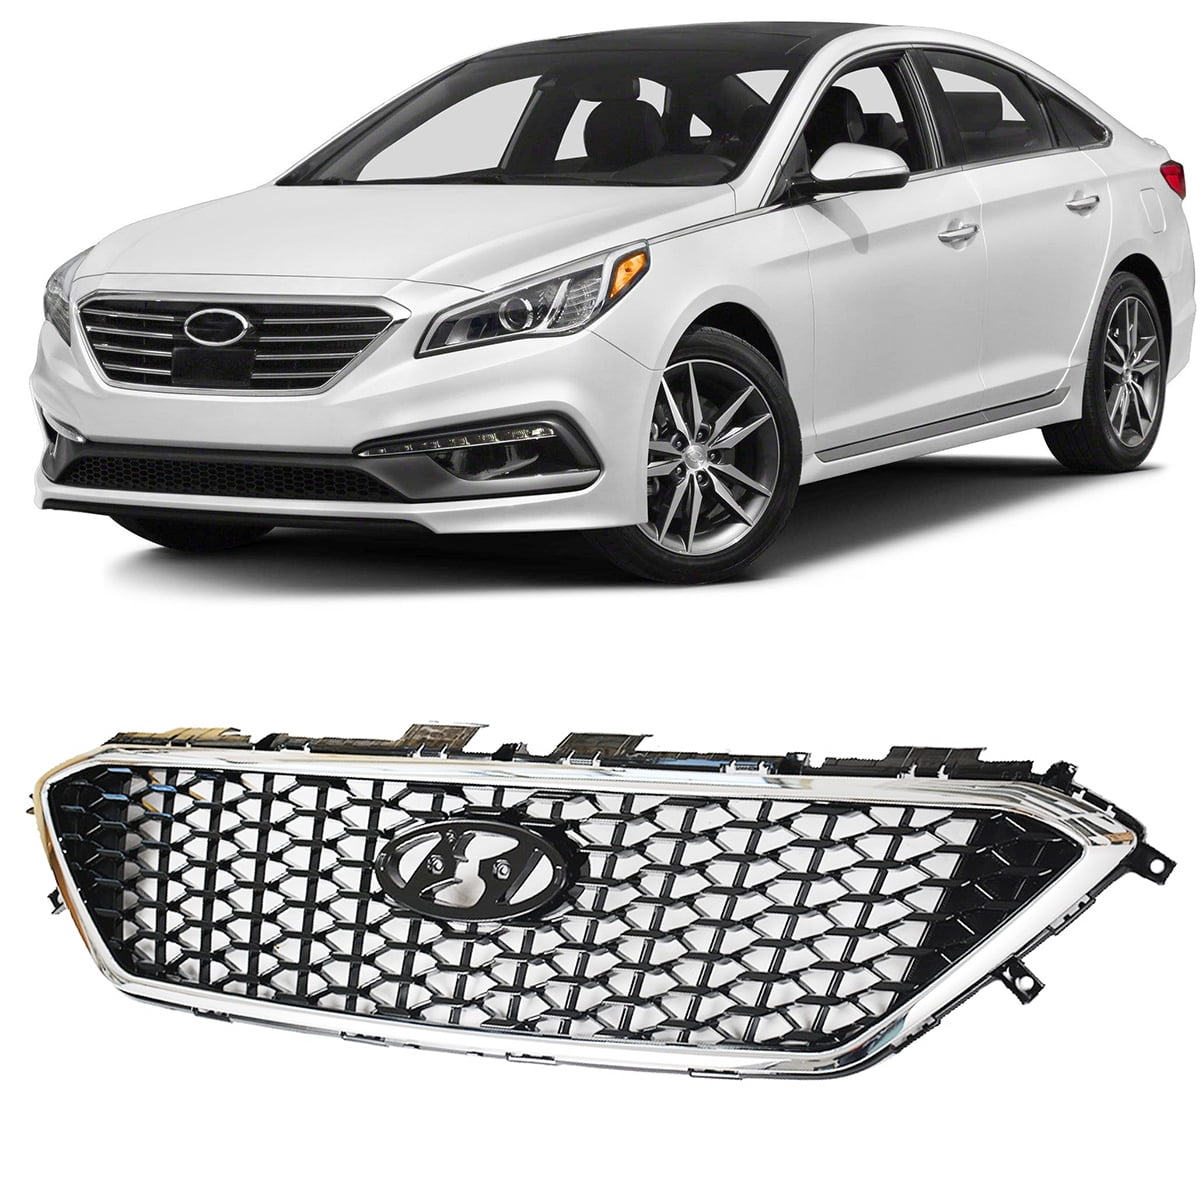 ZXMT Front Bumper Upper Grill ABS Chrome Grille Replacement for Hyundai Sonata 2015 2016 2017 